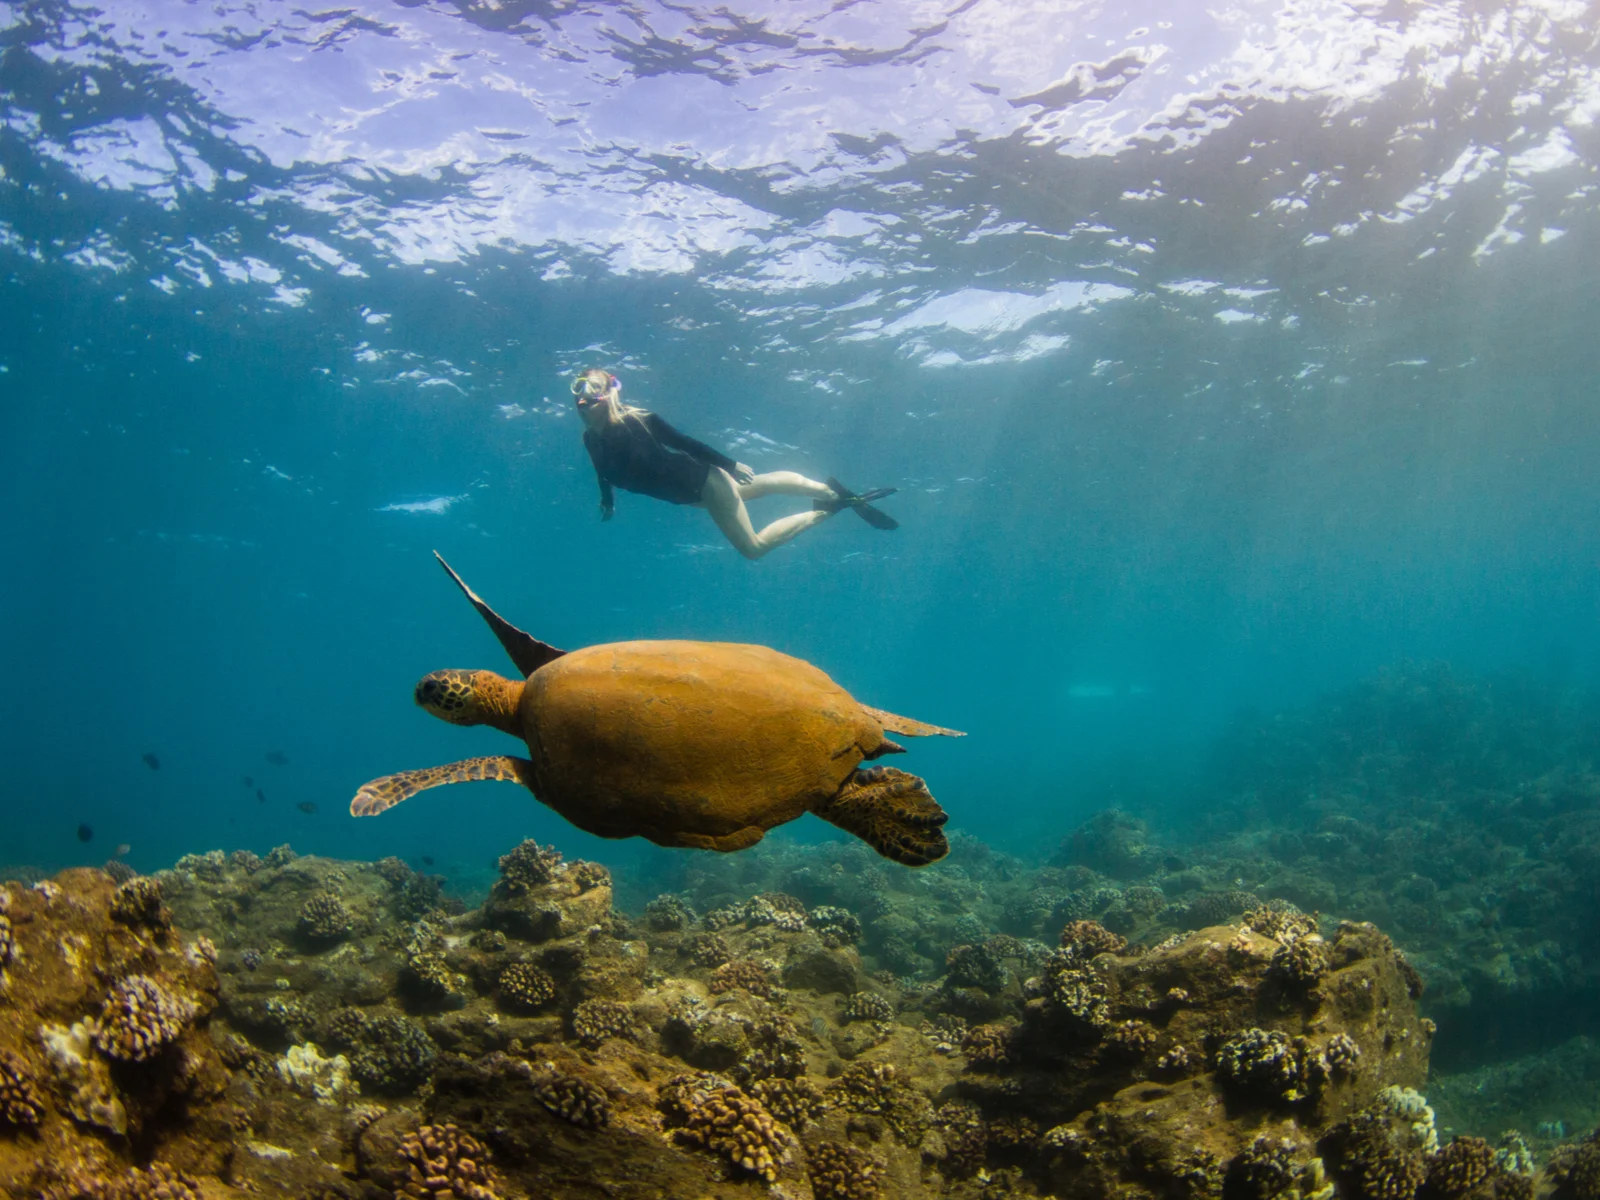 A woman snorkeling in the crystal clear water and a turtle seen hovering over coral reefs, one of the best things to do in Kauai